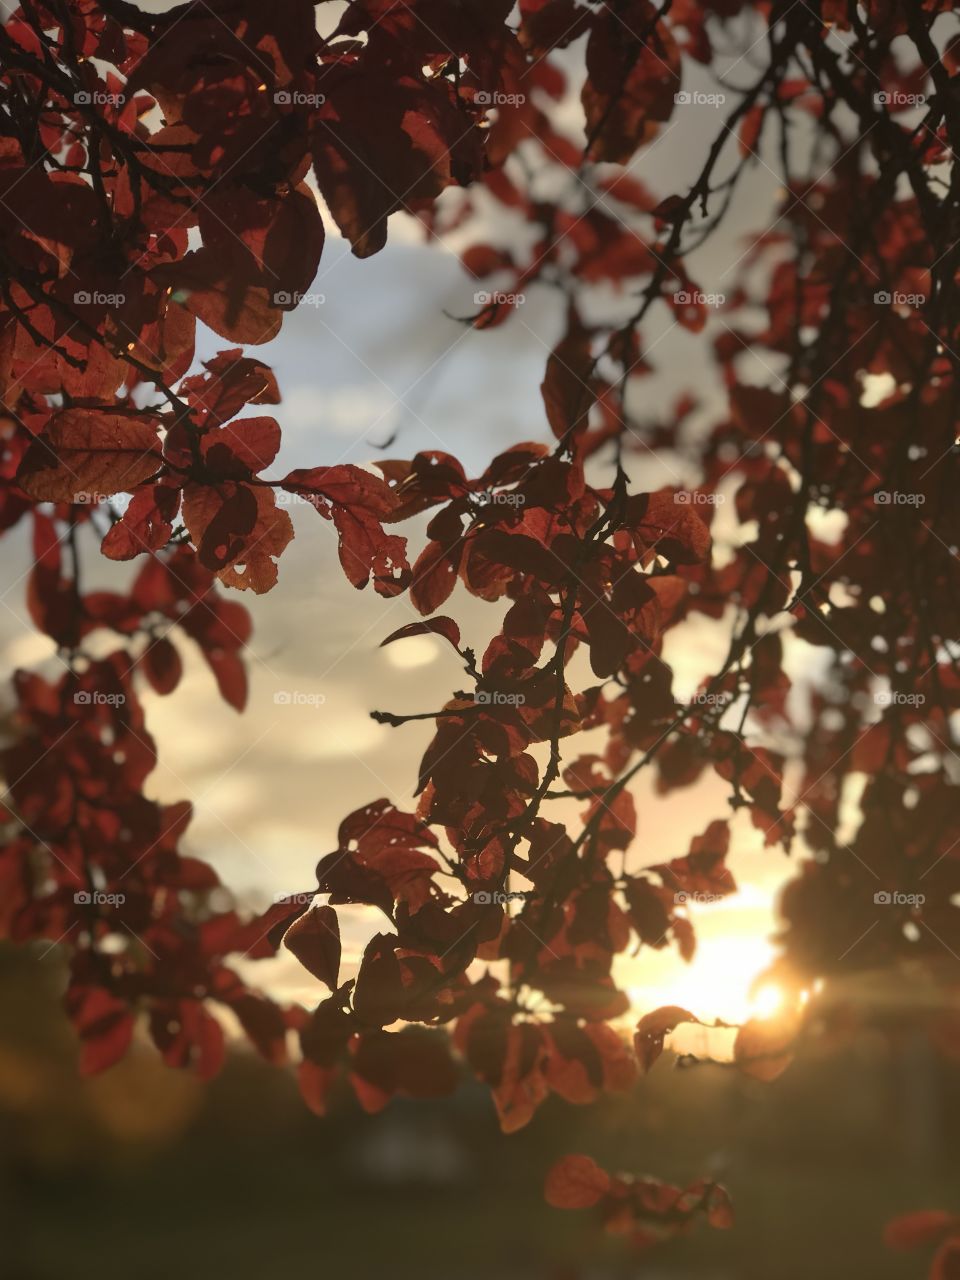 Fall leaves at sunset